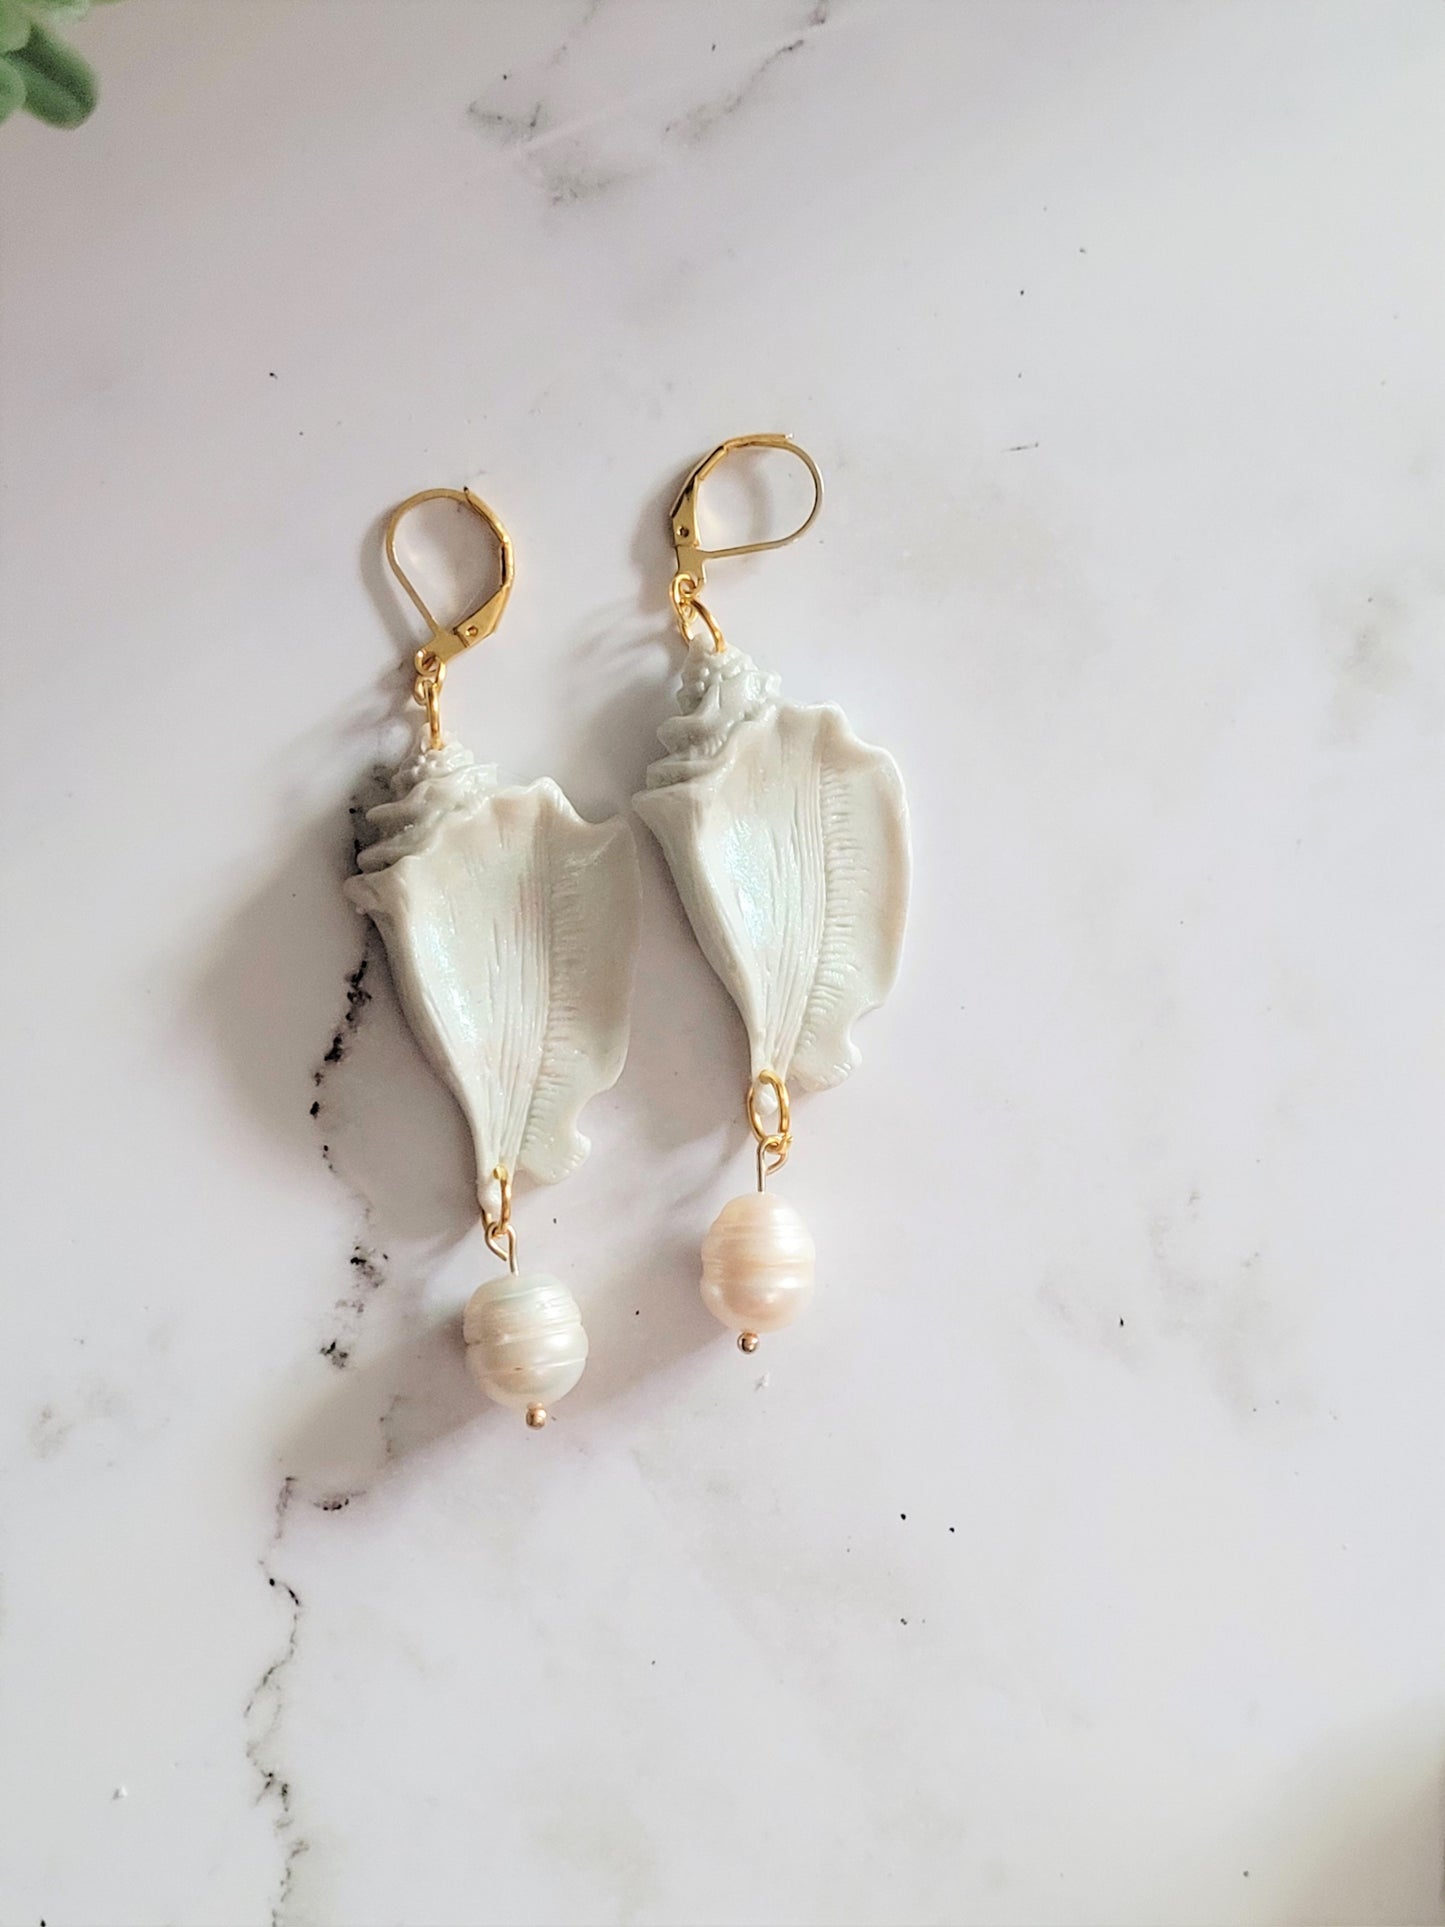 Closeup of conch shell shaped polymer clay Earrings on a white background. Earrings are made of pearlescent clay.